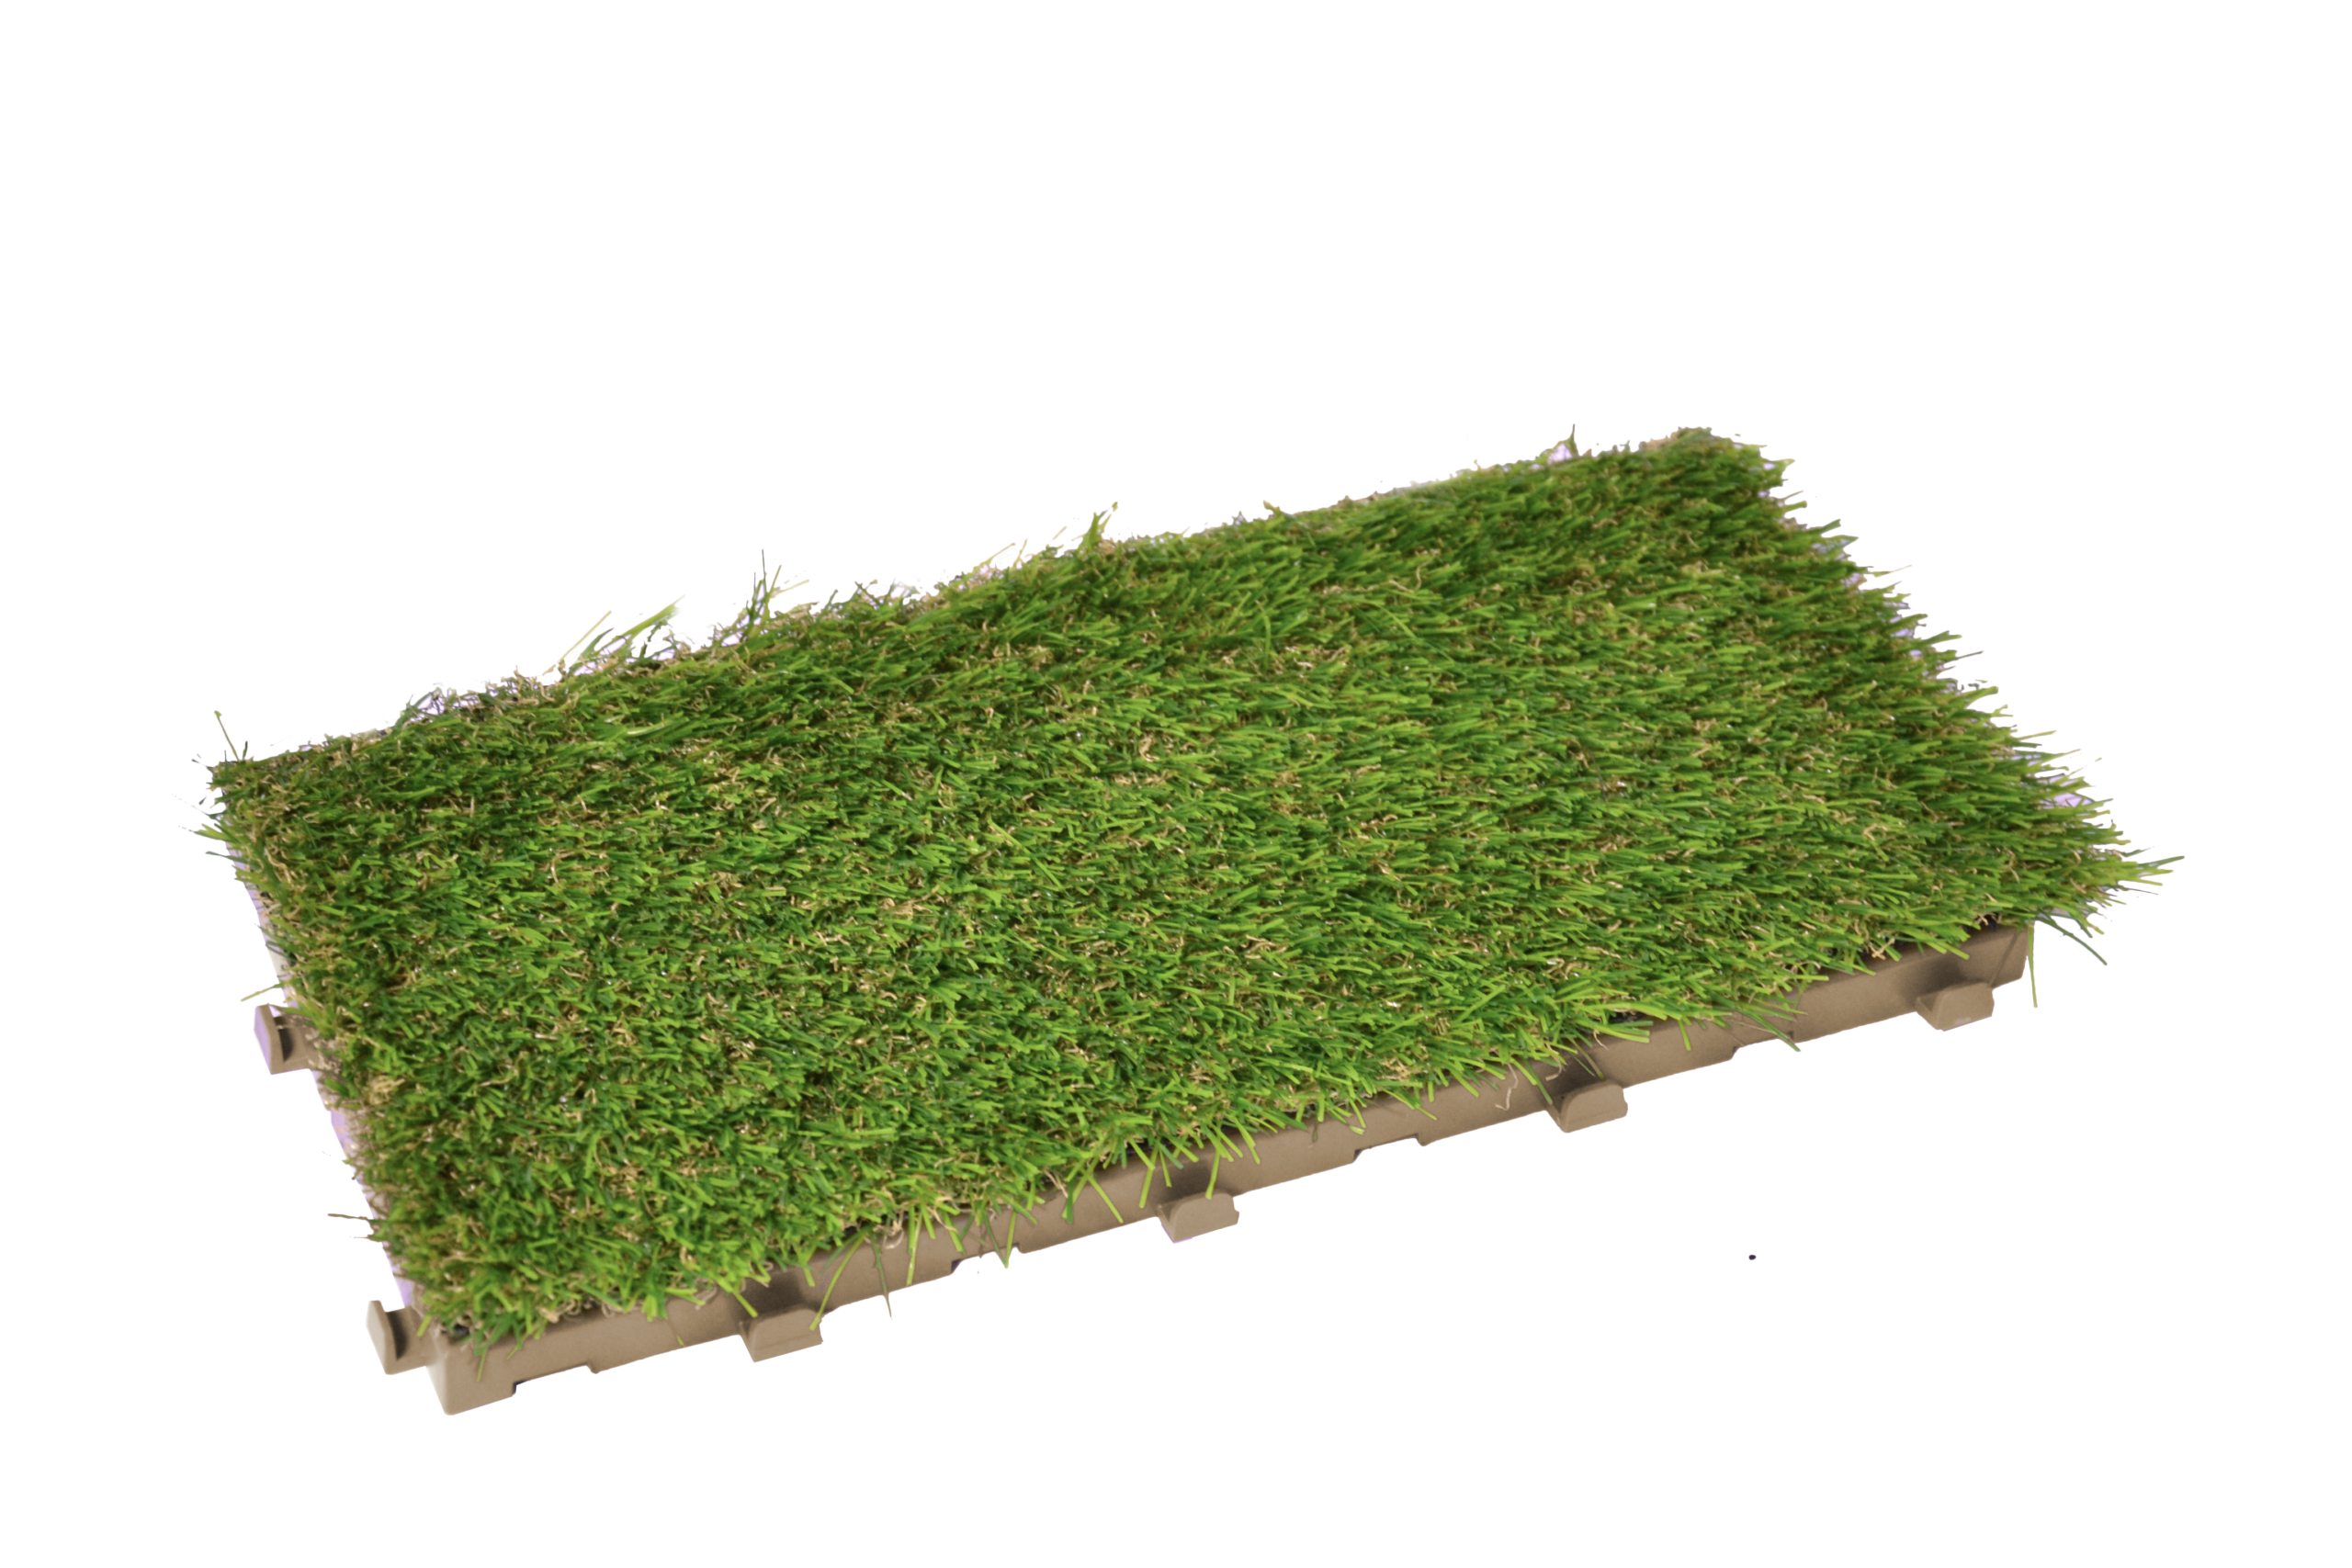 greenplate modular synthetic grass tile for outdoor by ONEK